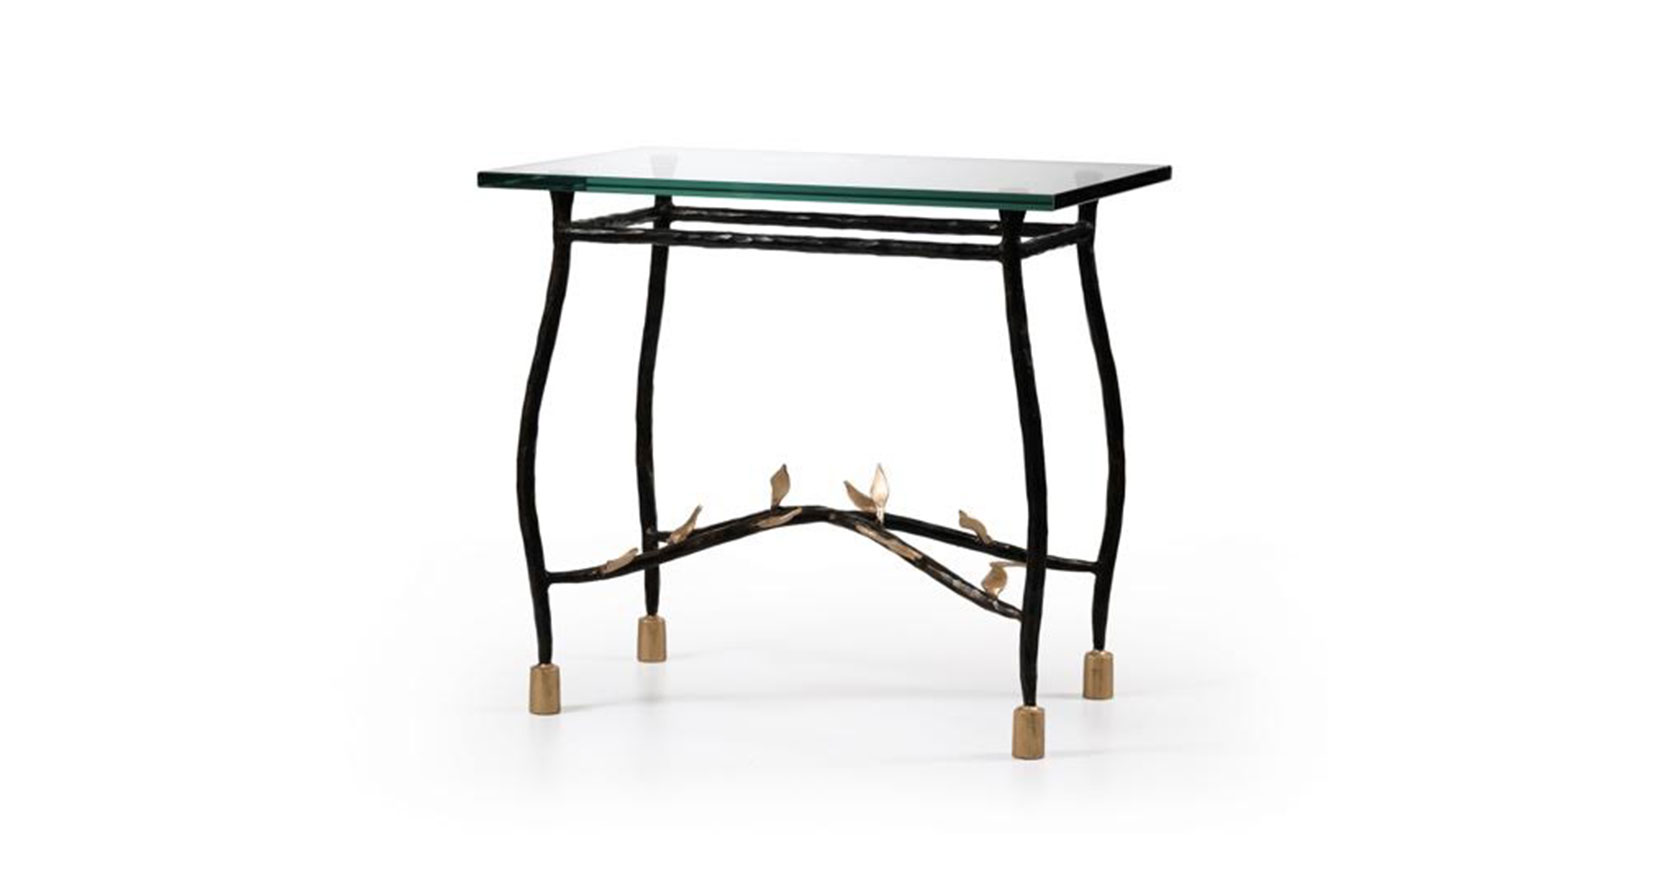 Garouste Bonetti, rectangular small table in baroque style, curved wrought iron legs decorated with small leaves, glass top